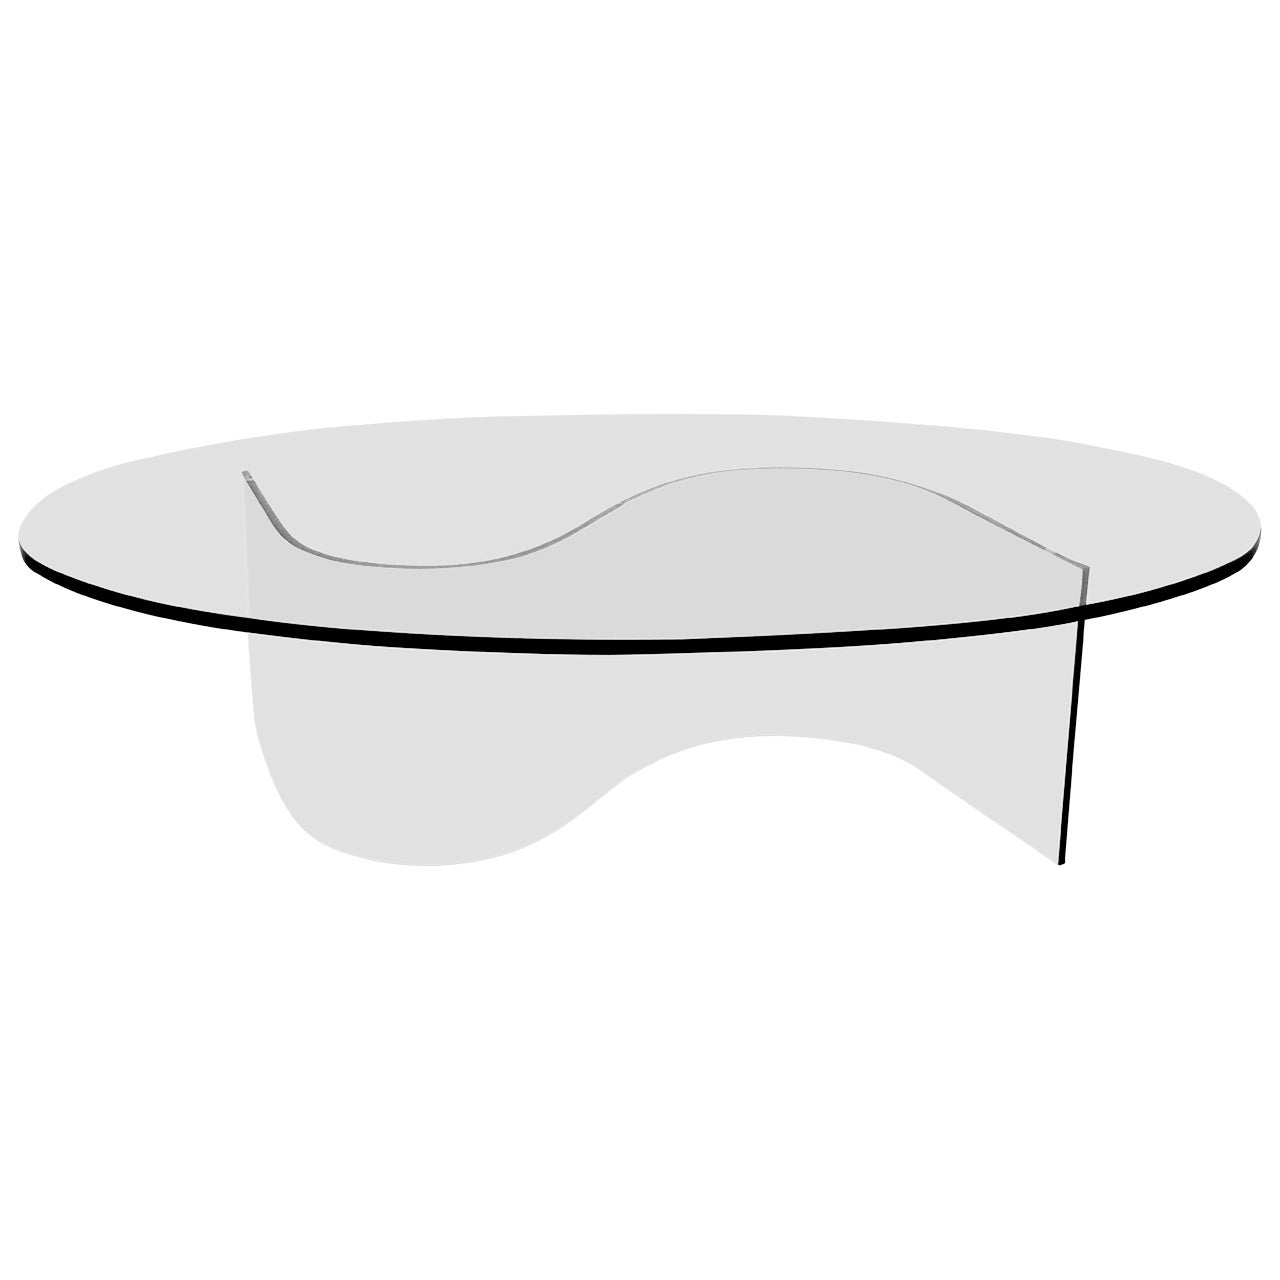 Pace "S" Shaped Glass Based Coffee Table